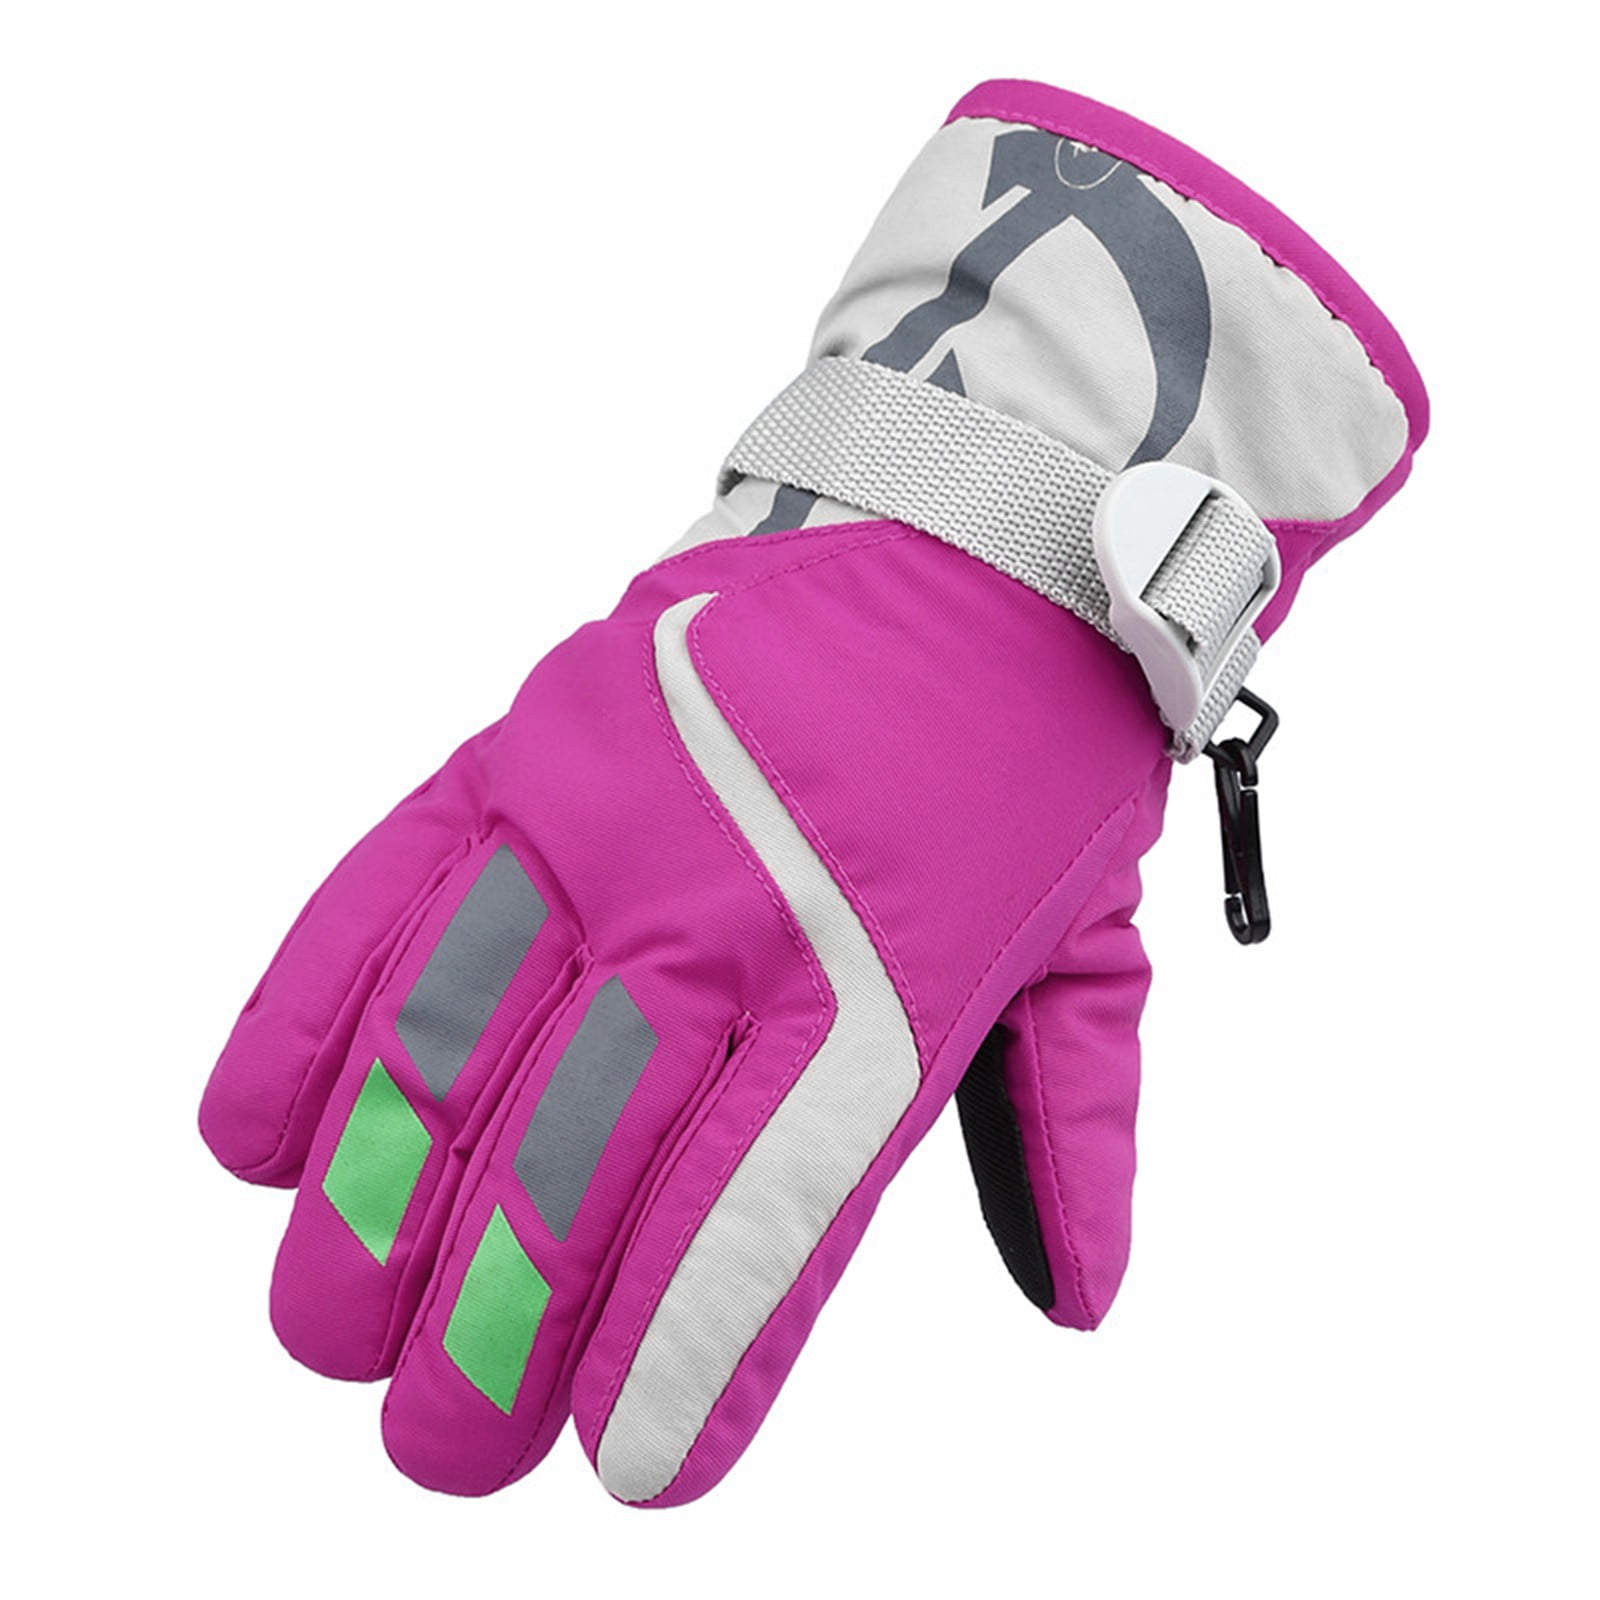 Warm Gloves Waterproof Winter Snow Ski Mittens for Girls Skiing/Cycling Pink XS